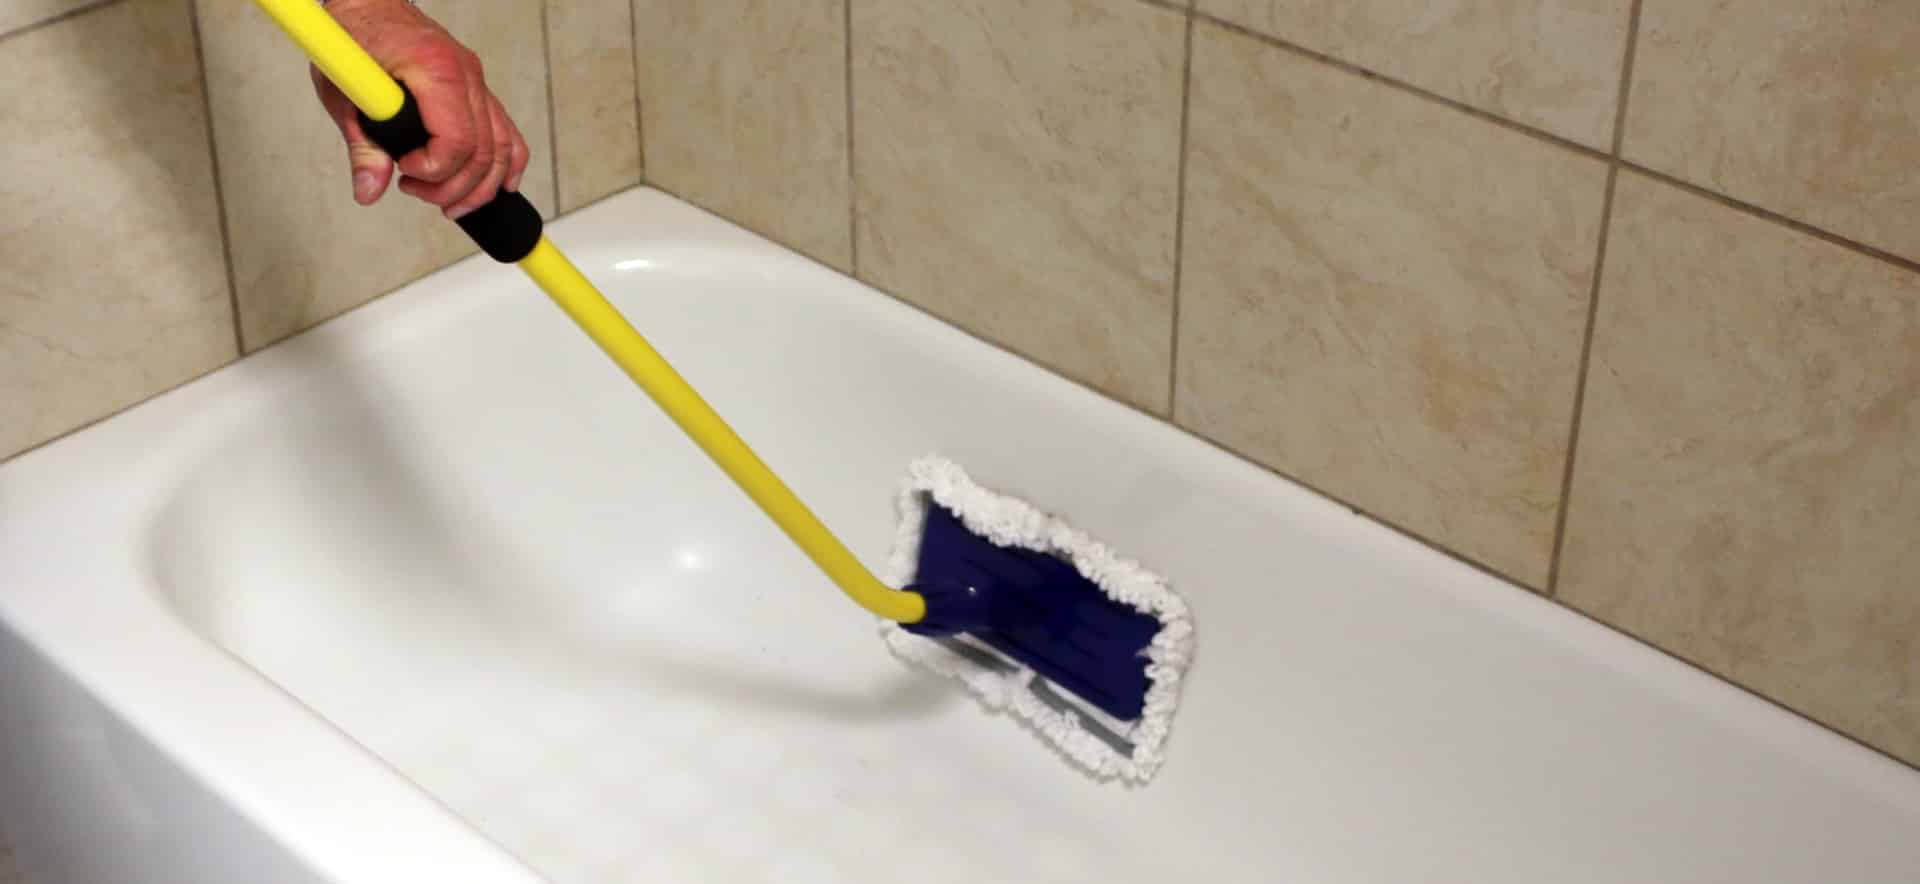 A person uses a Simple Scrub to clean the side of a bath tub.